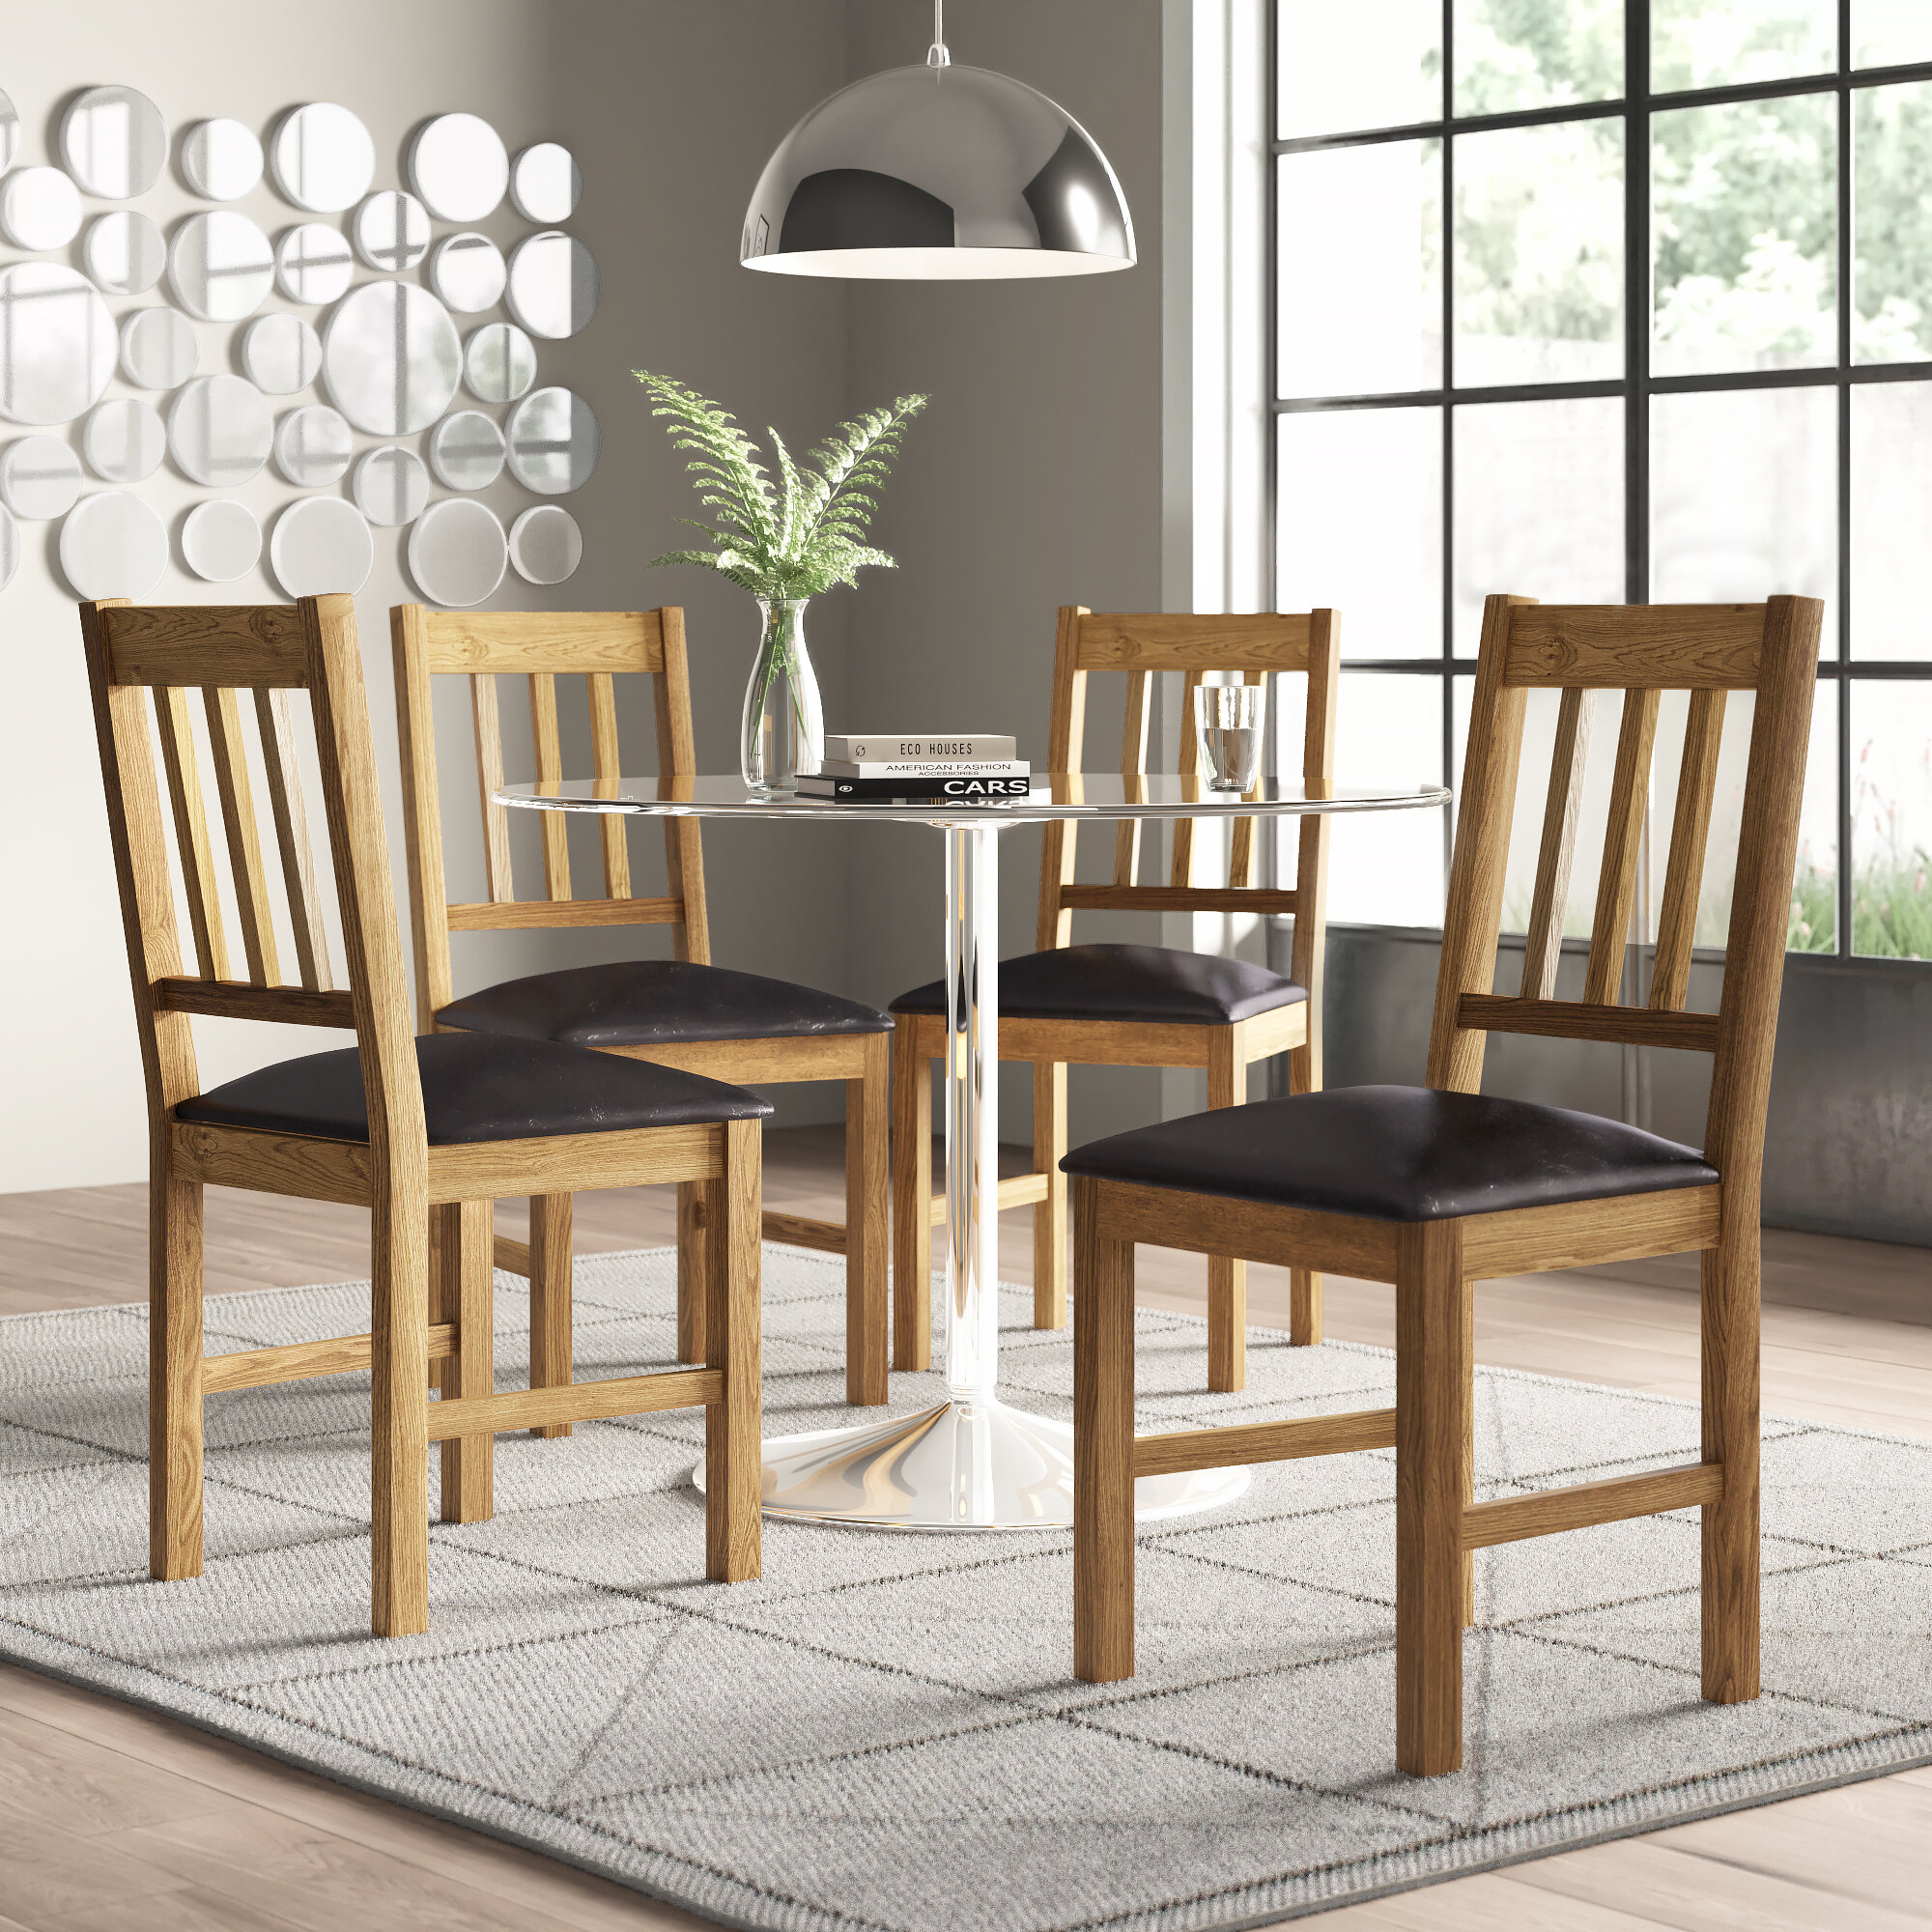 Brown Leather Dining Chairs Set Of 4 - Good looking and comfortable